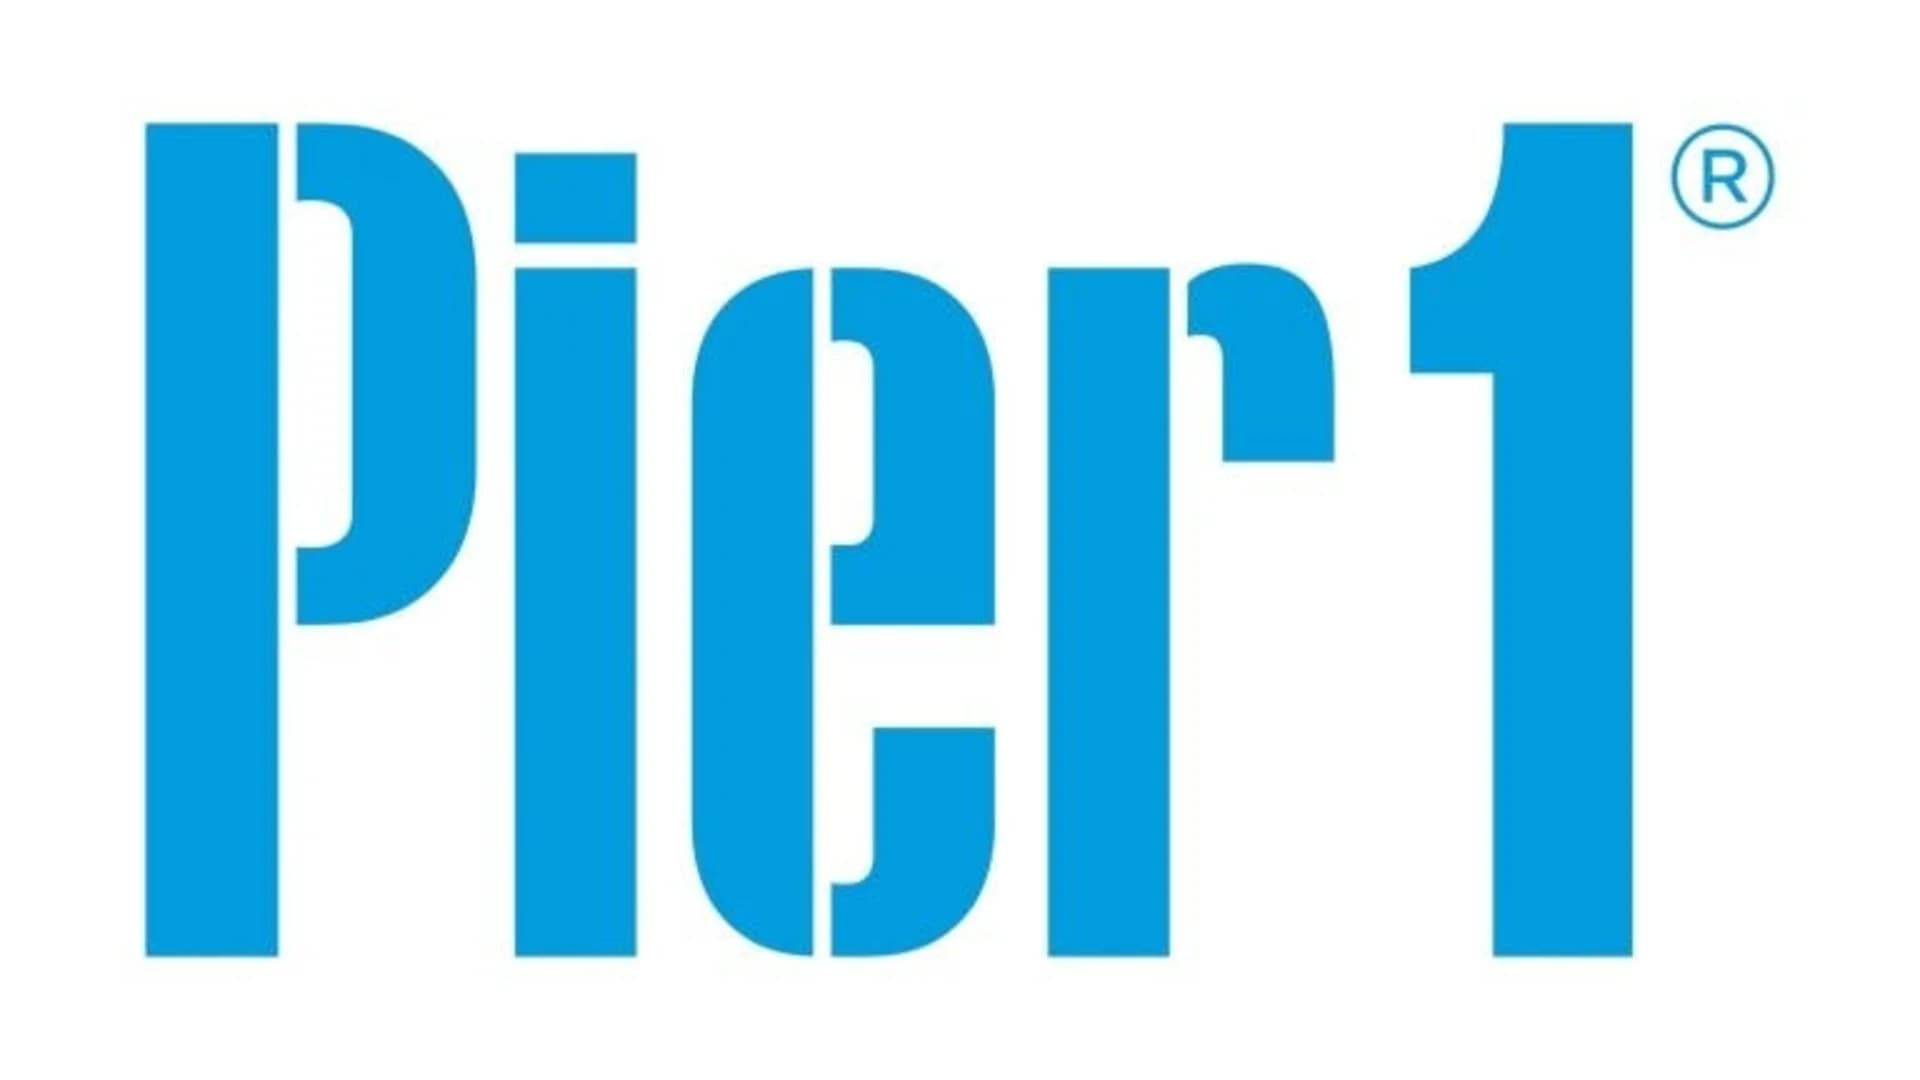 Pier 1 to go out of business and close all 540 stores